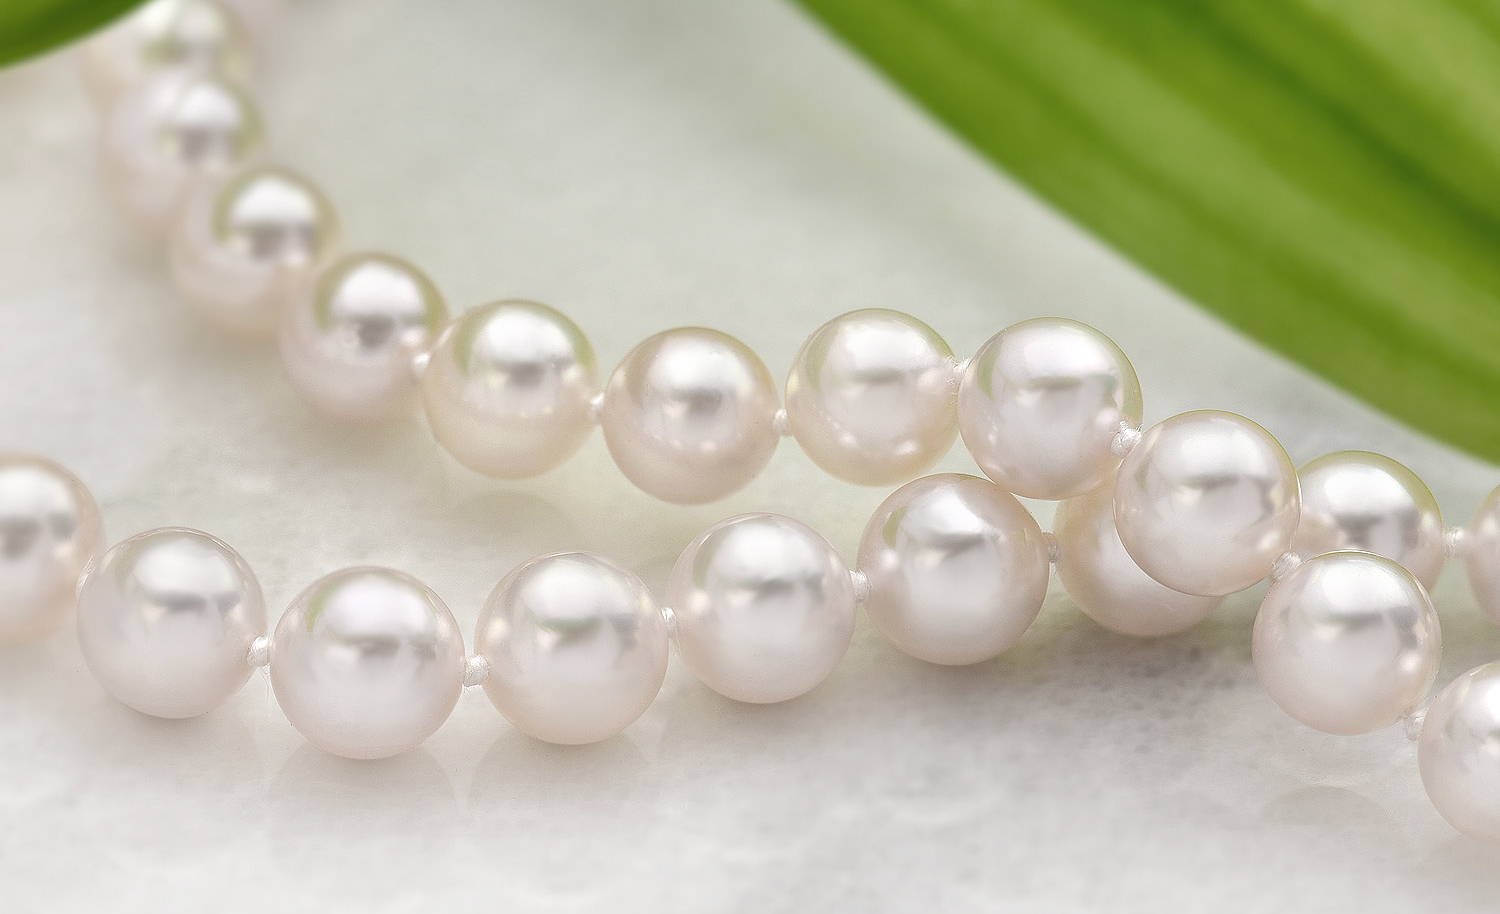 A1 51 cm Genuine Cultured Freshwater Pearl Jewellery Necklace Collier Real Jewellery dfgc 